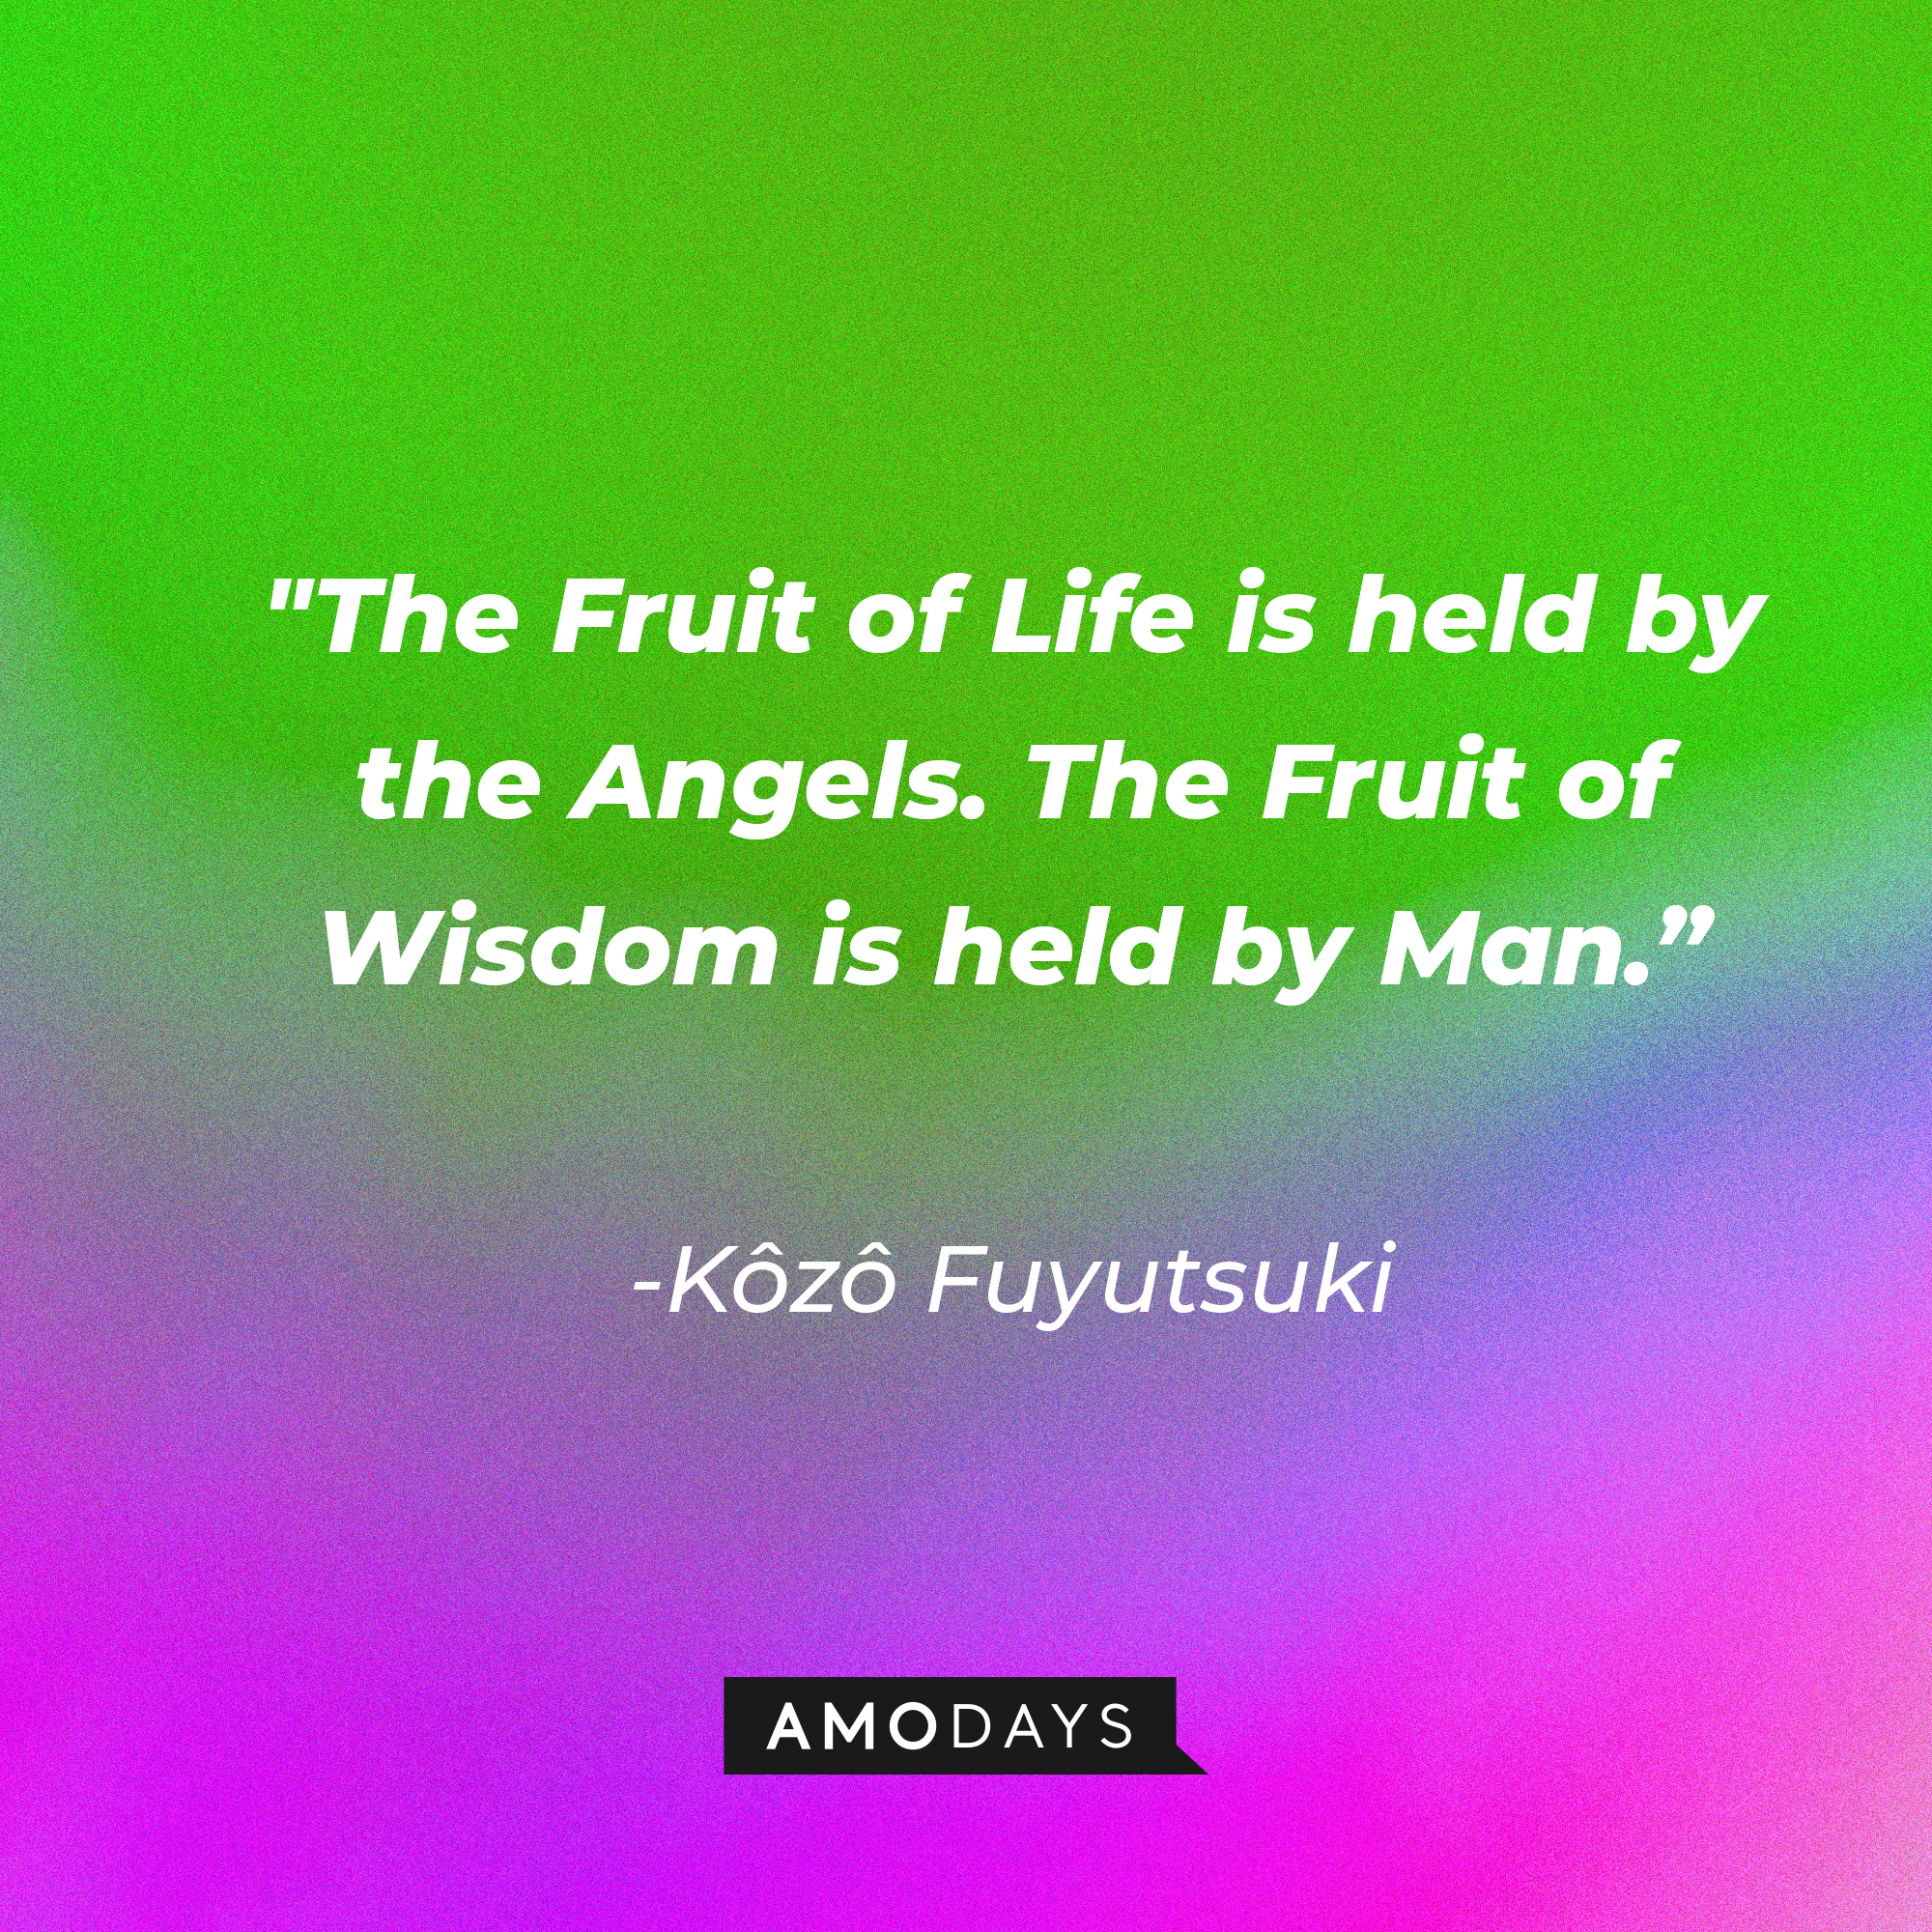 Kôzô Fuyutsuki’s quote: "The Fruit of Life is held by the Angels. The Fruit of Wisdom is held by Man.” | Source: AmoDays